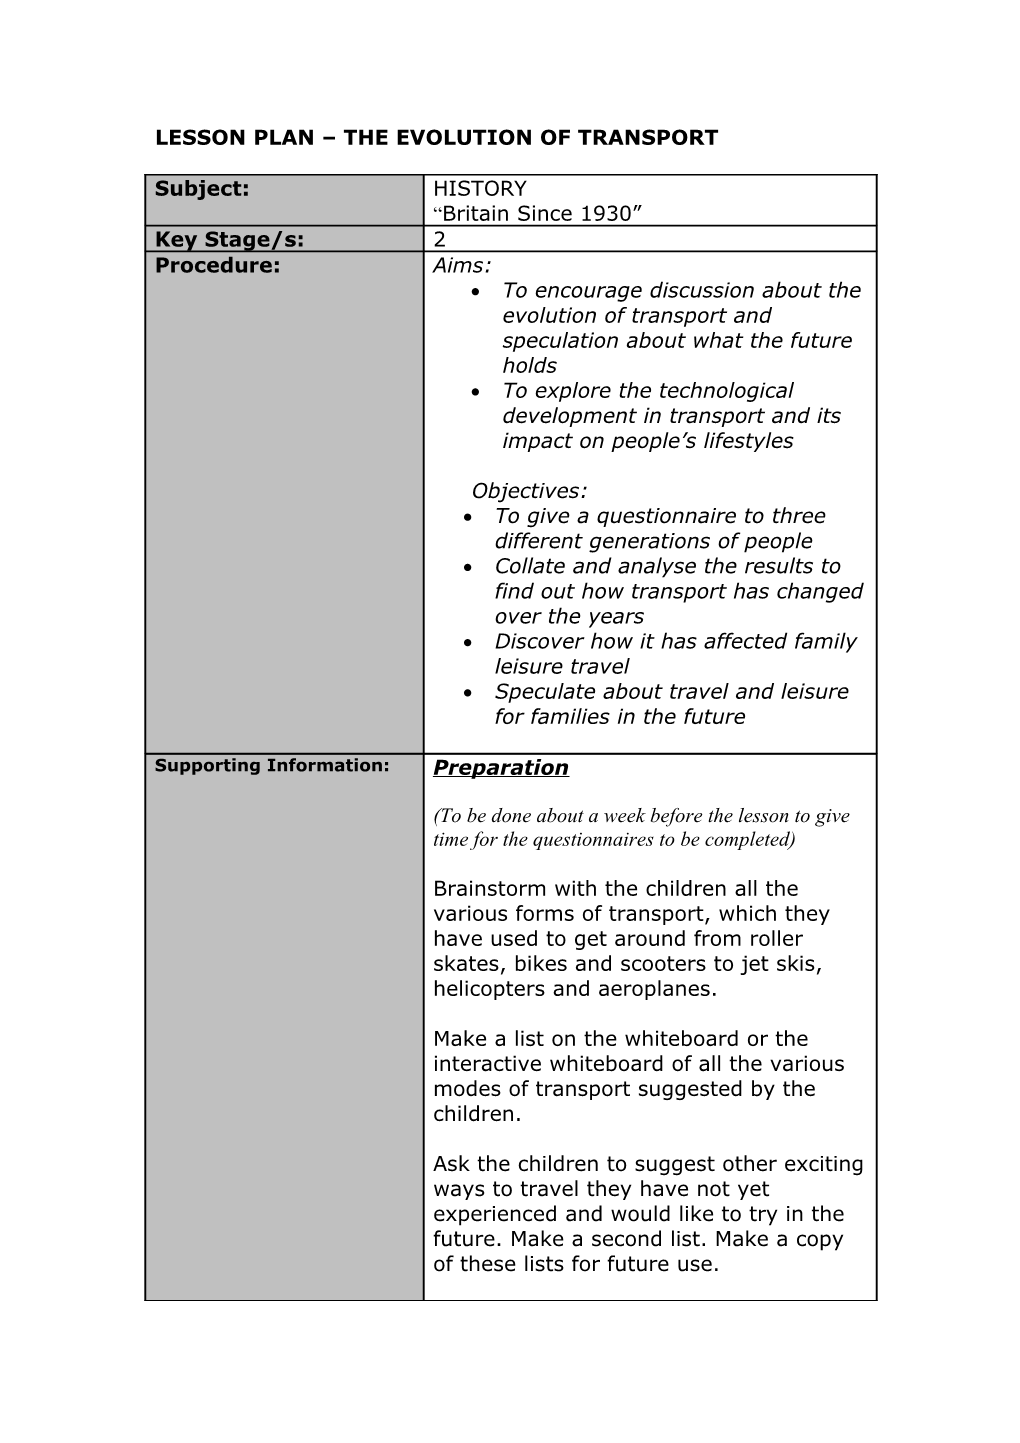 Lesson Plan Template s3